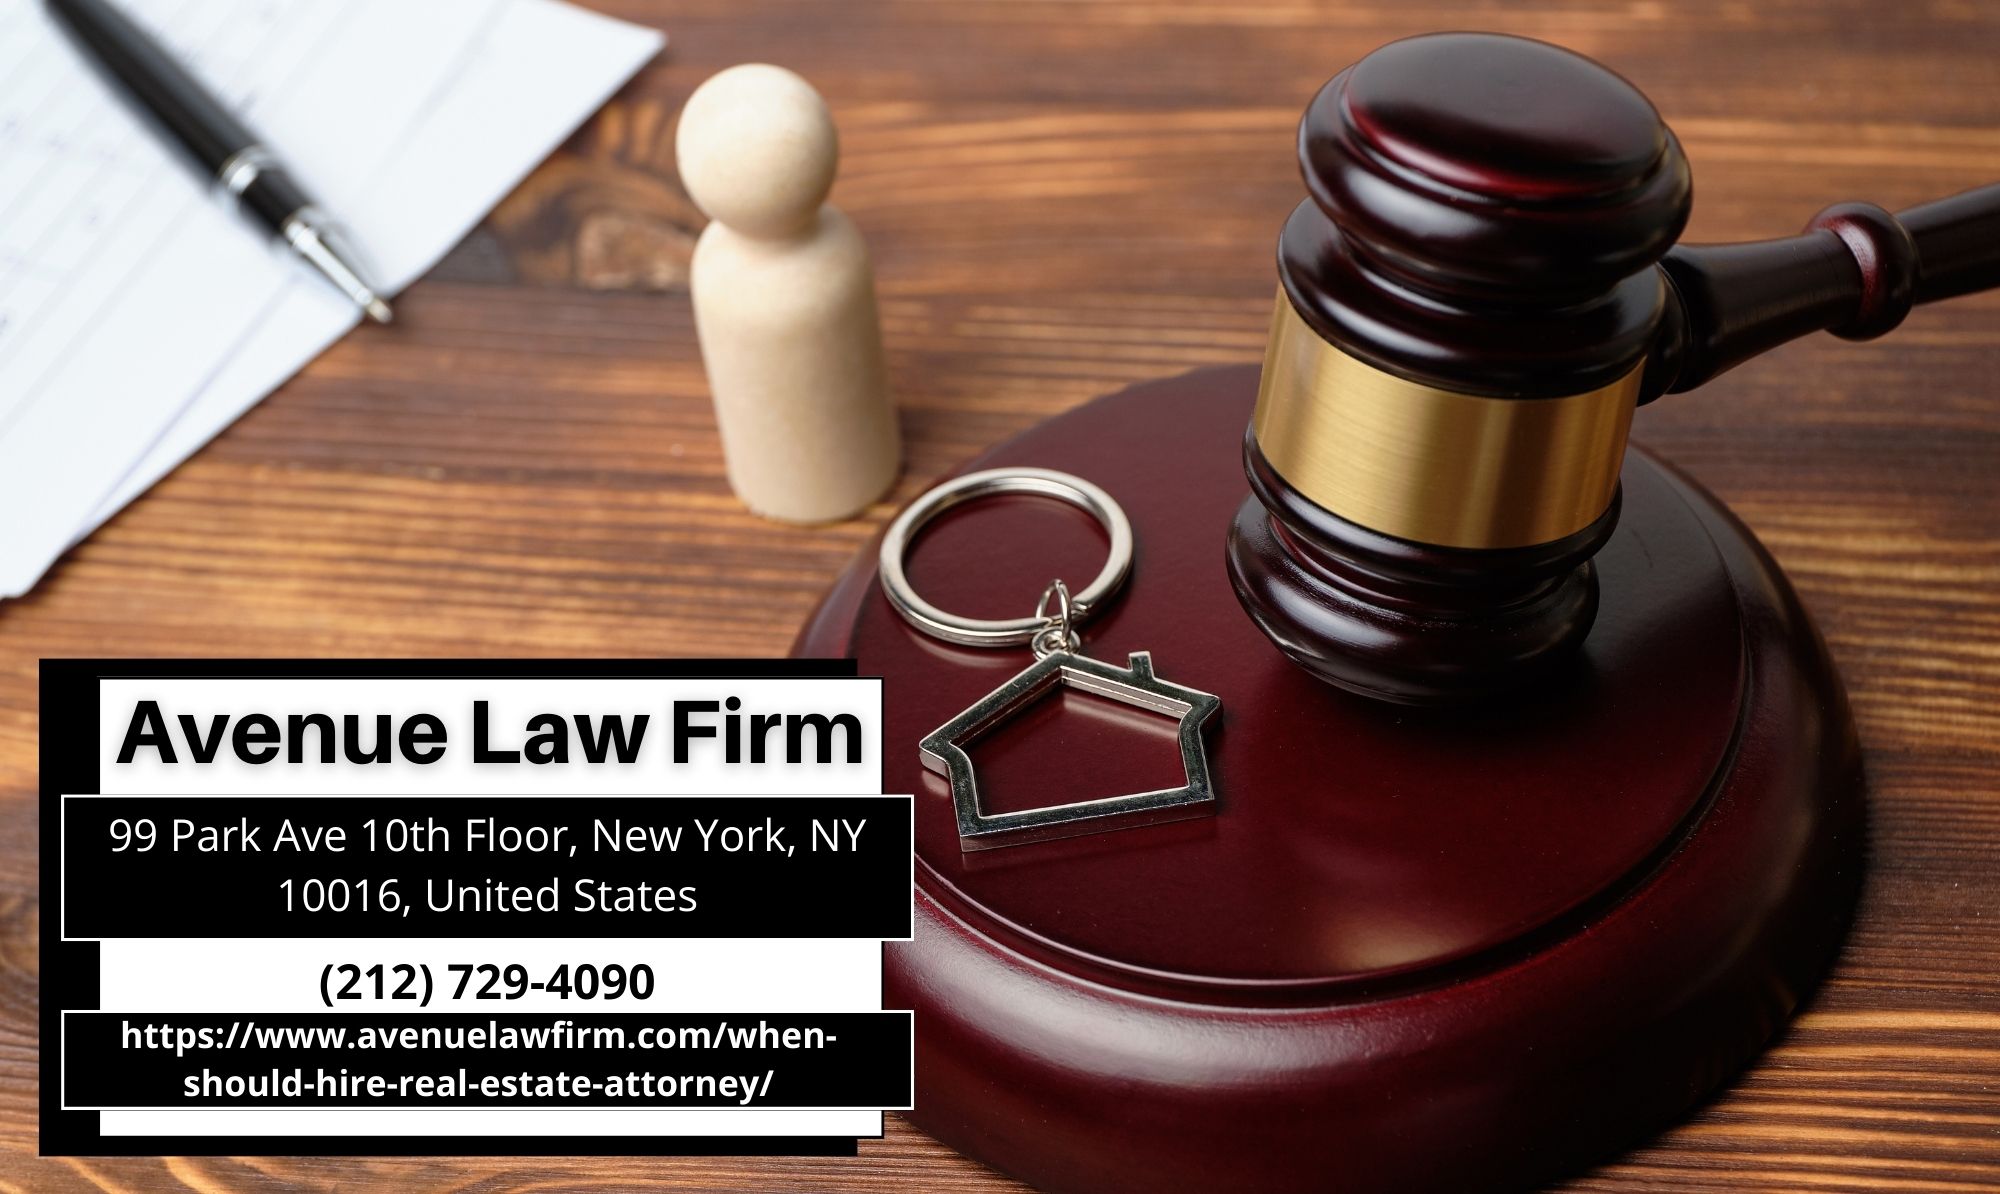 New York Real Estate Lawyer Peter Zinkovetsky Sheds Light on the Optimal Time to Hire an Attorney in Newly Released Article